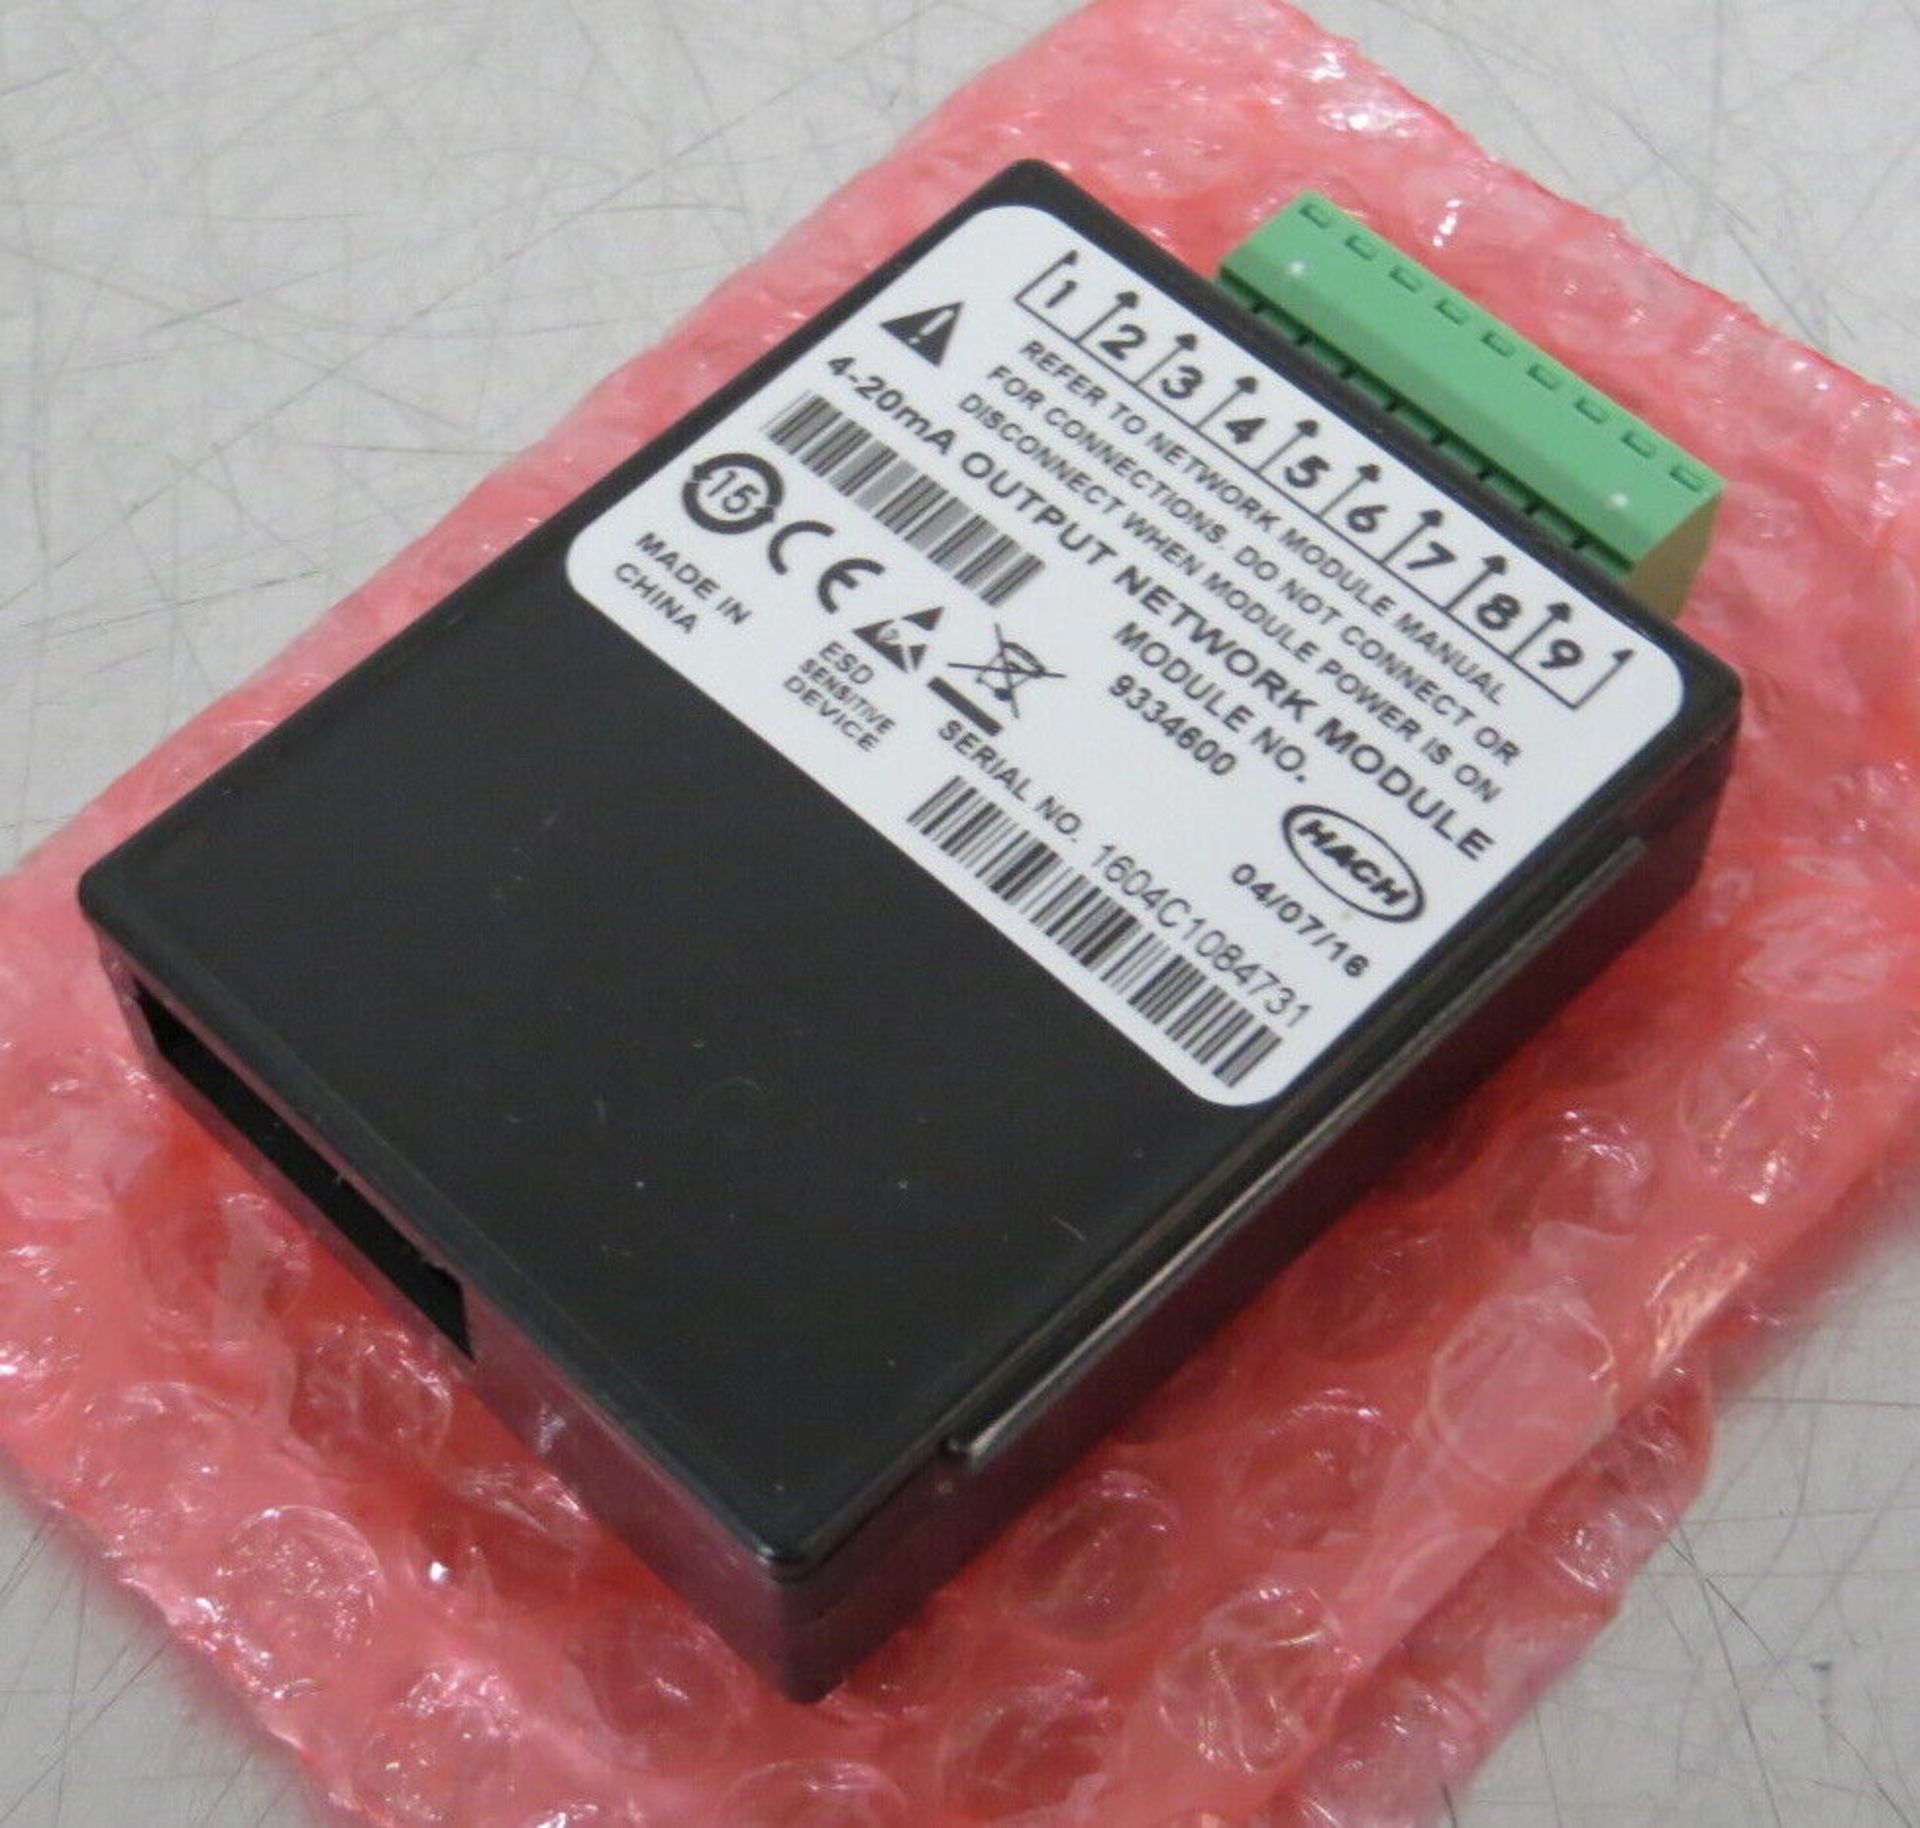 Hach 9334600 4-20mA Output Expansion Module - Gilroy - Image 2 of 6